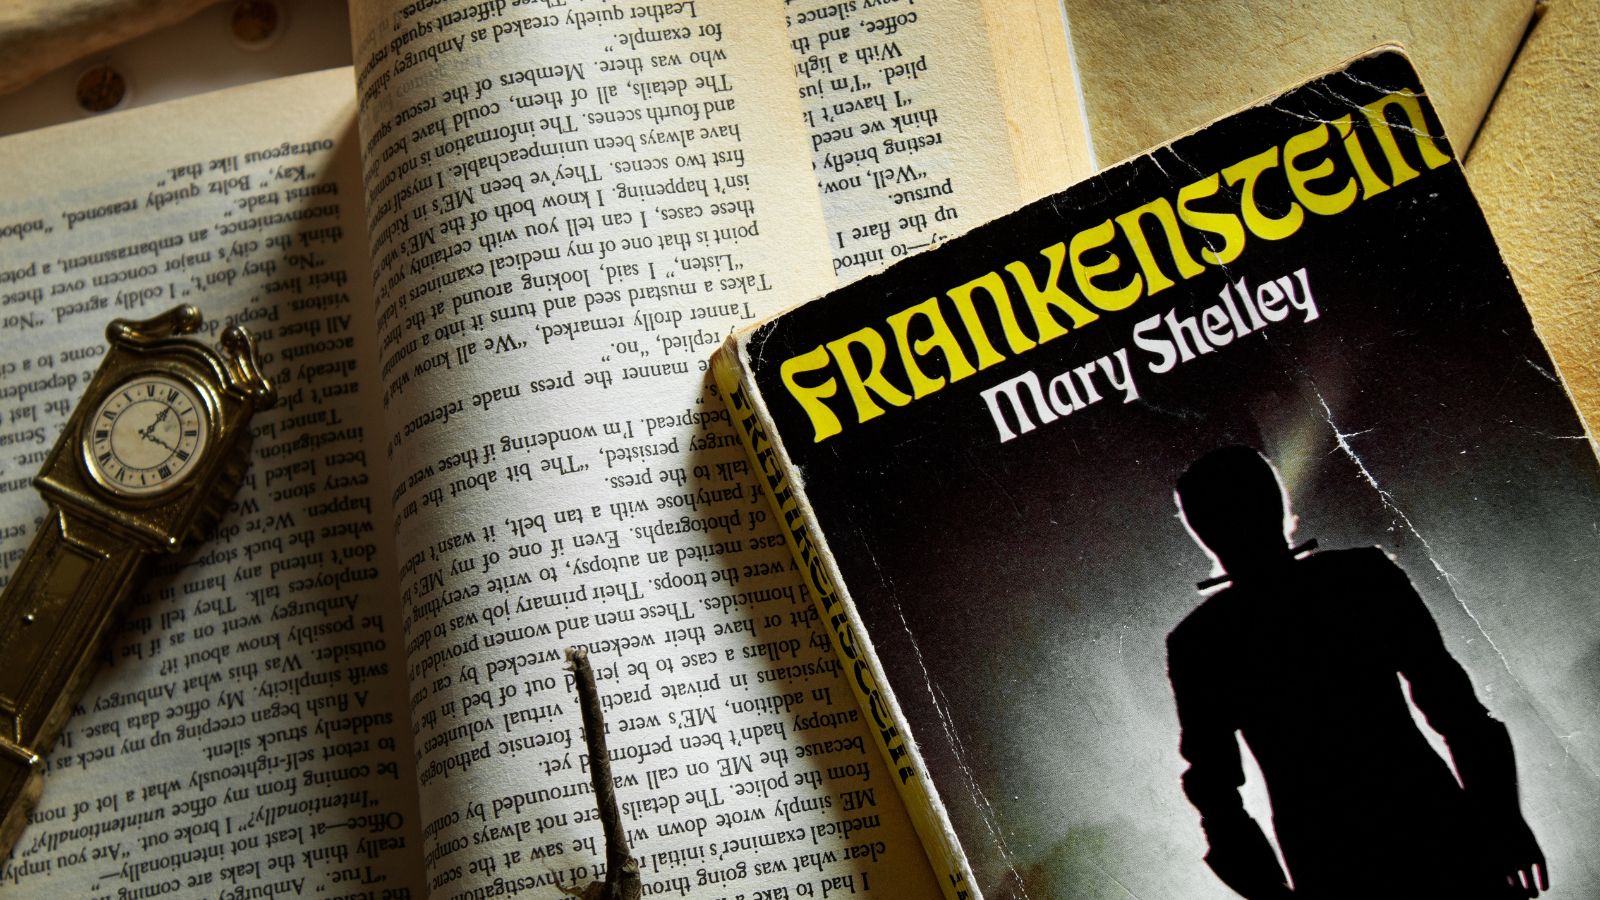 <p>This classic has been adapted time and time again, but nothing can ever beat the original. Mary Shelley's novel is the original creation story, utilizing themes of gothic horror to tell a much more poignant story of ethics, morality, and the twisted forms that love takes. Throughout history, Frankenstein has been used as a source in many important ethical debates.</p>